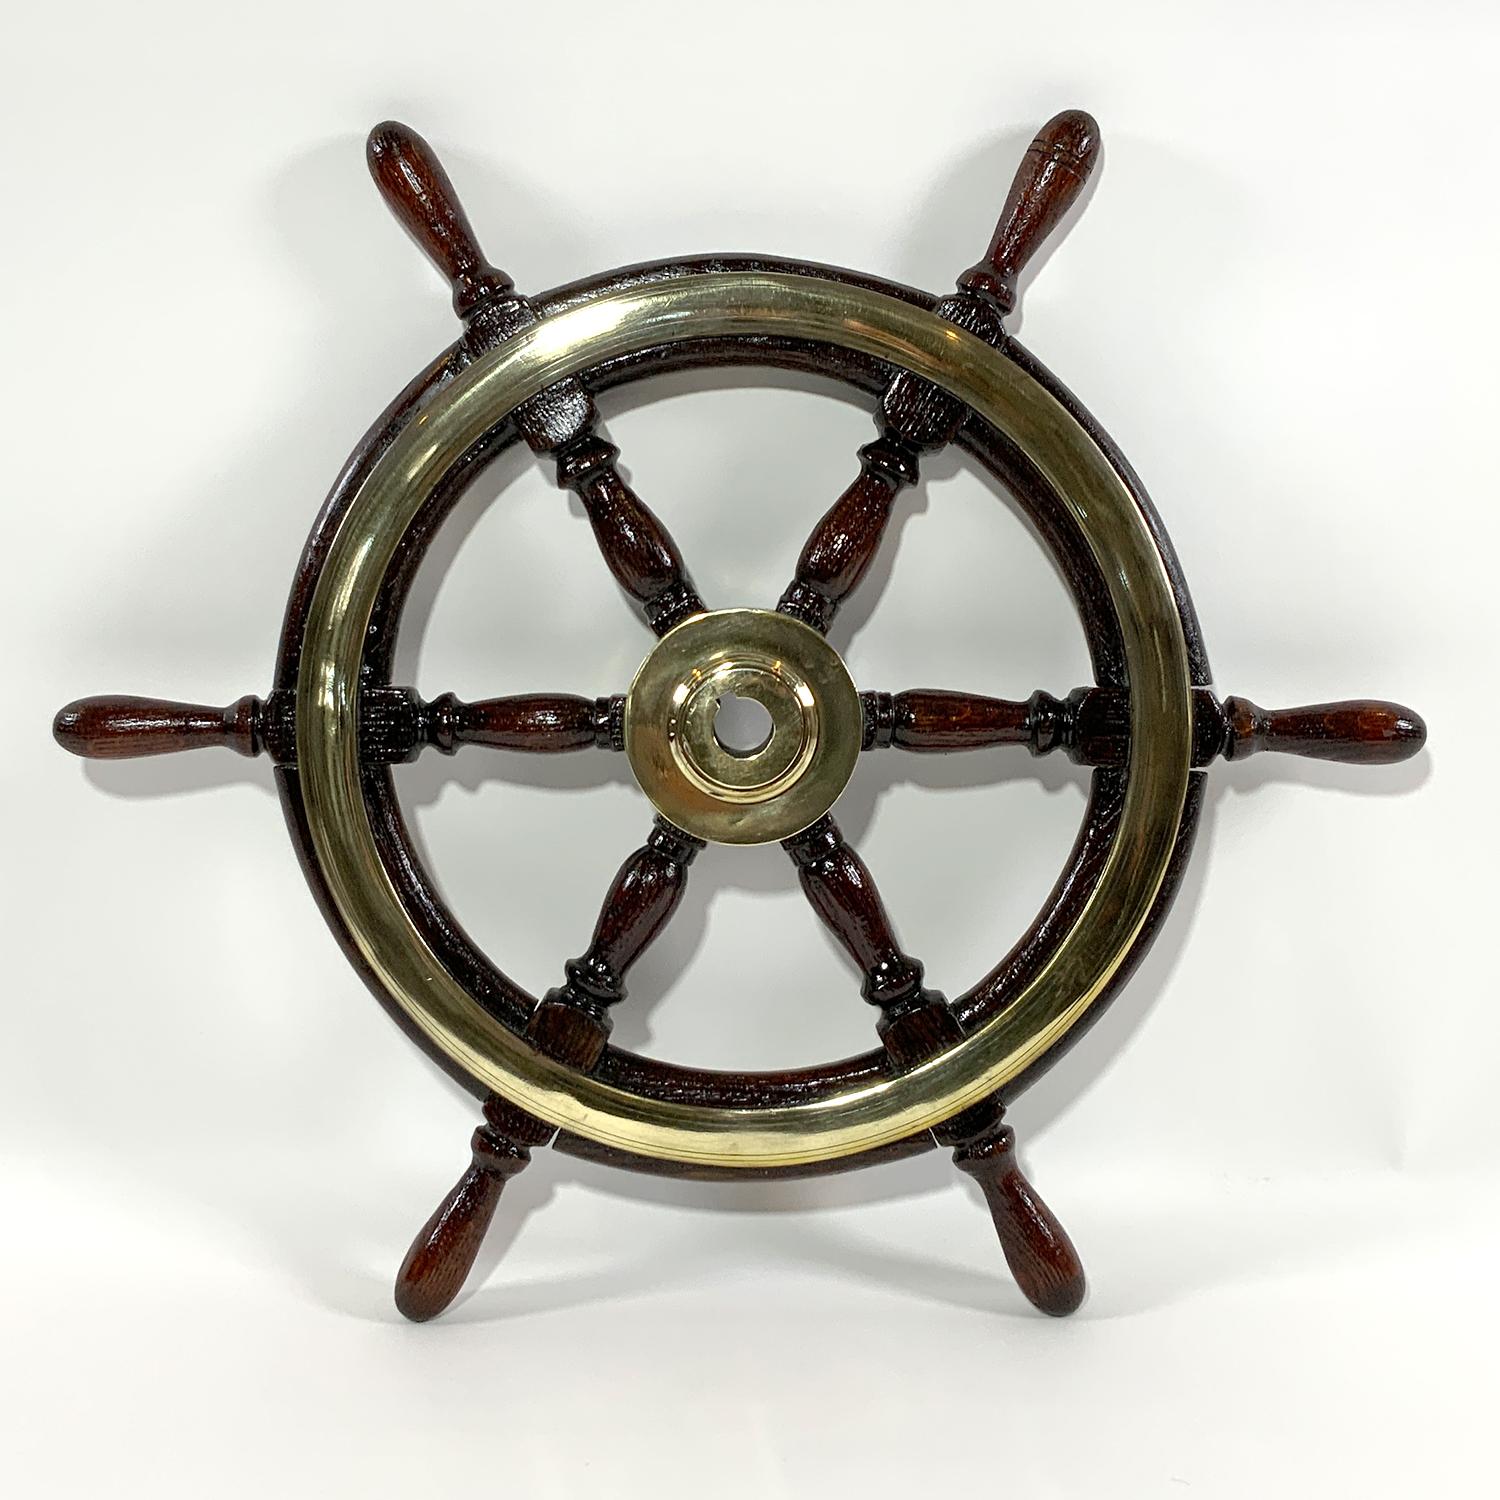 Antique late nineteenth century yacht wheel with heavy brass hub and brass trim rings. Rich hardwood with varnish finish. Quality relic. Circa 1895. Six carefully turned spokes and handles. Ready for display.